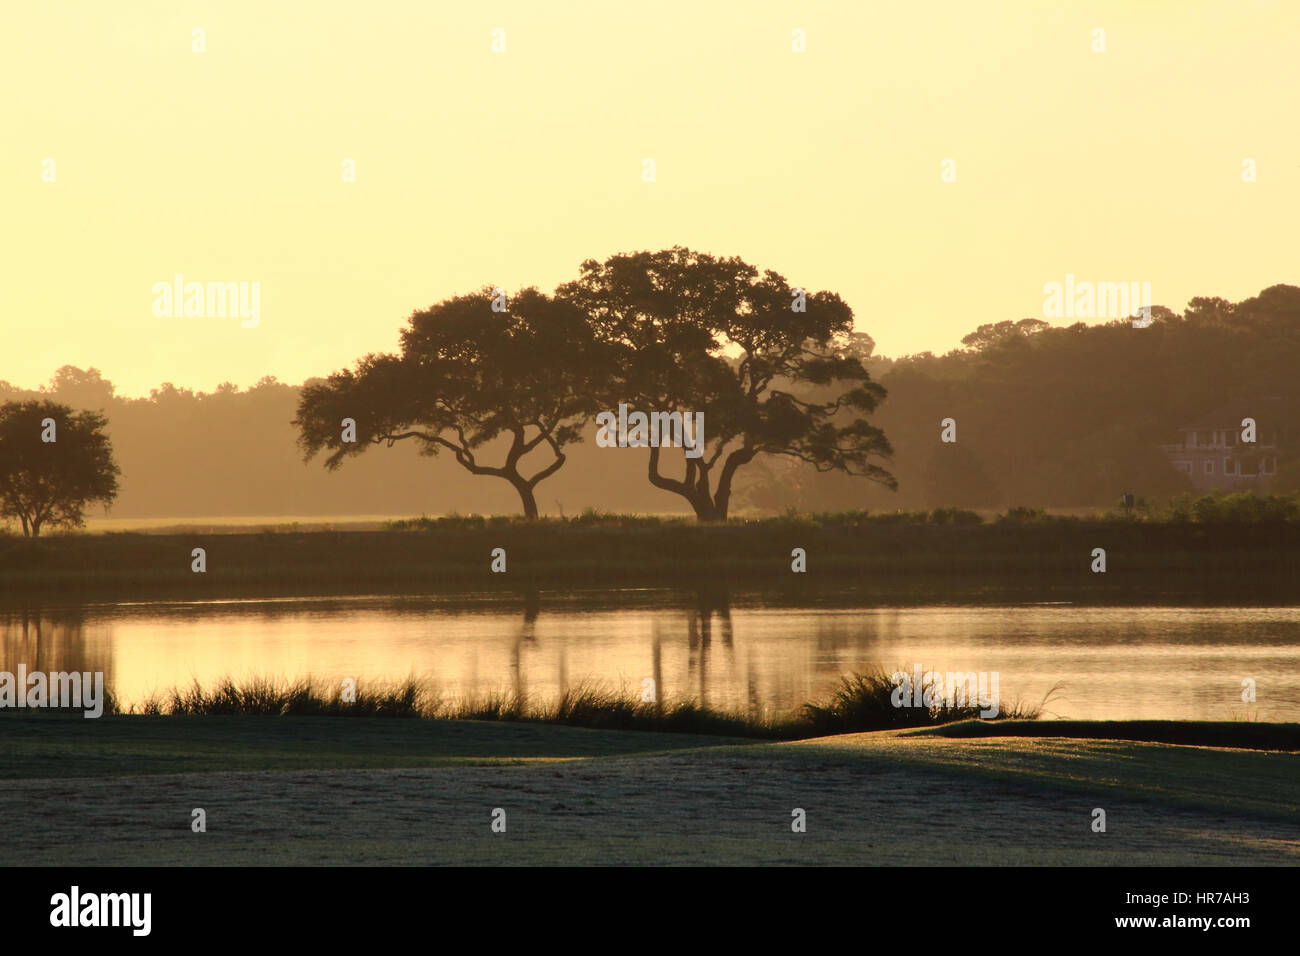 Two Live Oak trees are silhouetted against a hazy forest on Kiawah Island, South Carolina. Bass Pond and a portion of a golf course are visible. Stock Photo